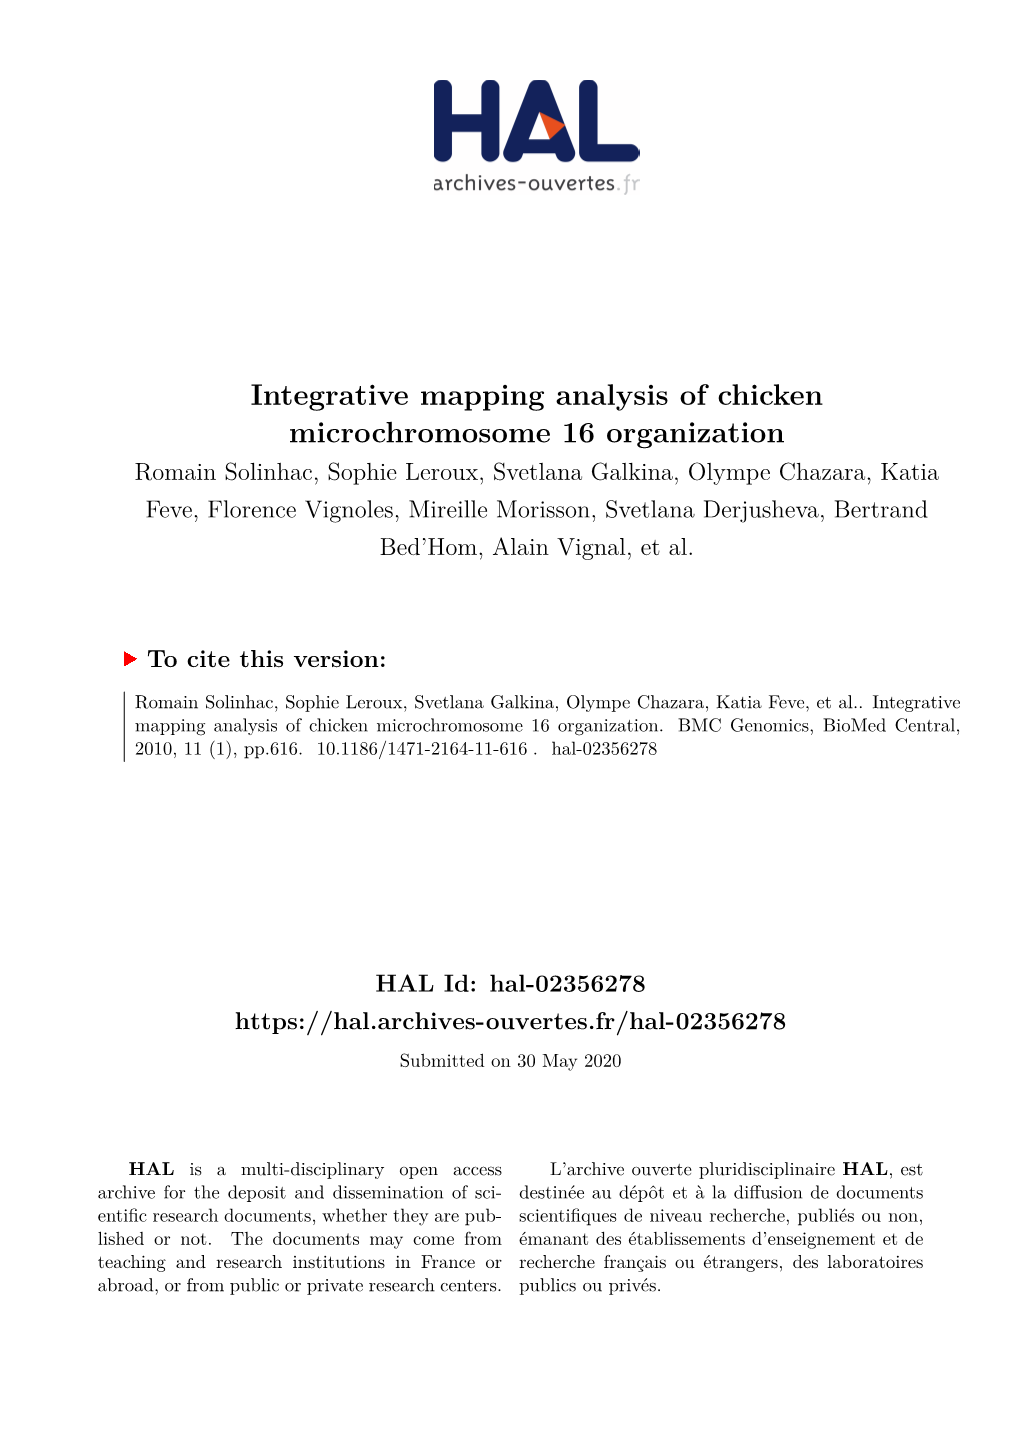 Integrative Mapping Analysis of Chicken Microchromosome 16